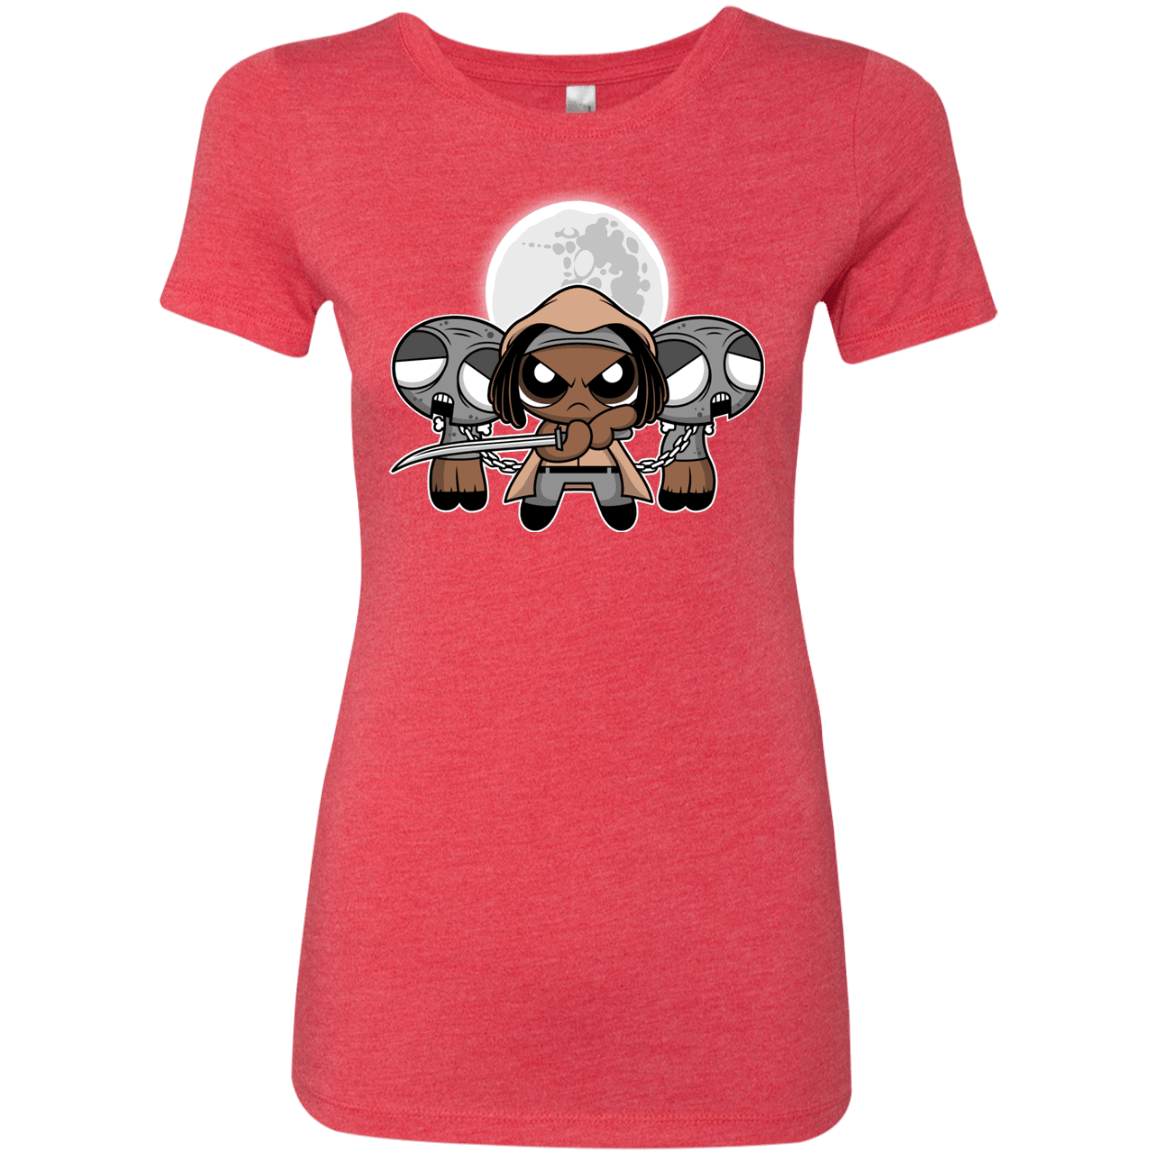 SHUFFLE AND SLICE AND NOT VERY NICE Women's Triblend T-Shirt